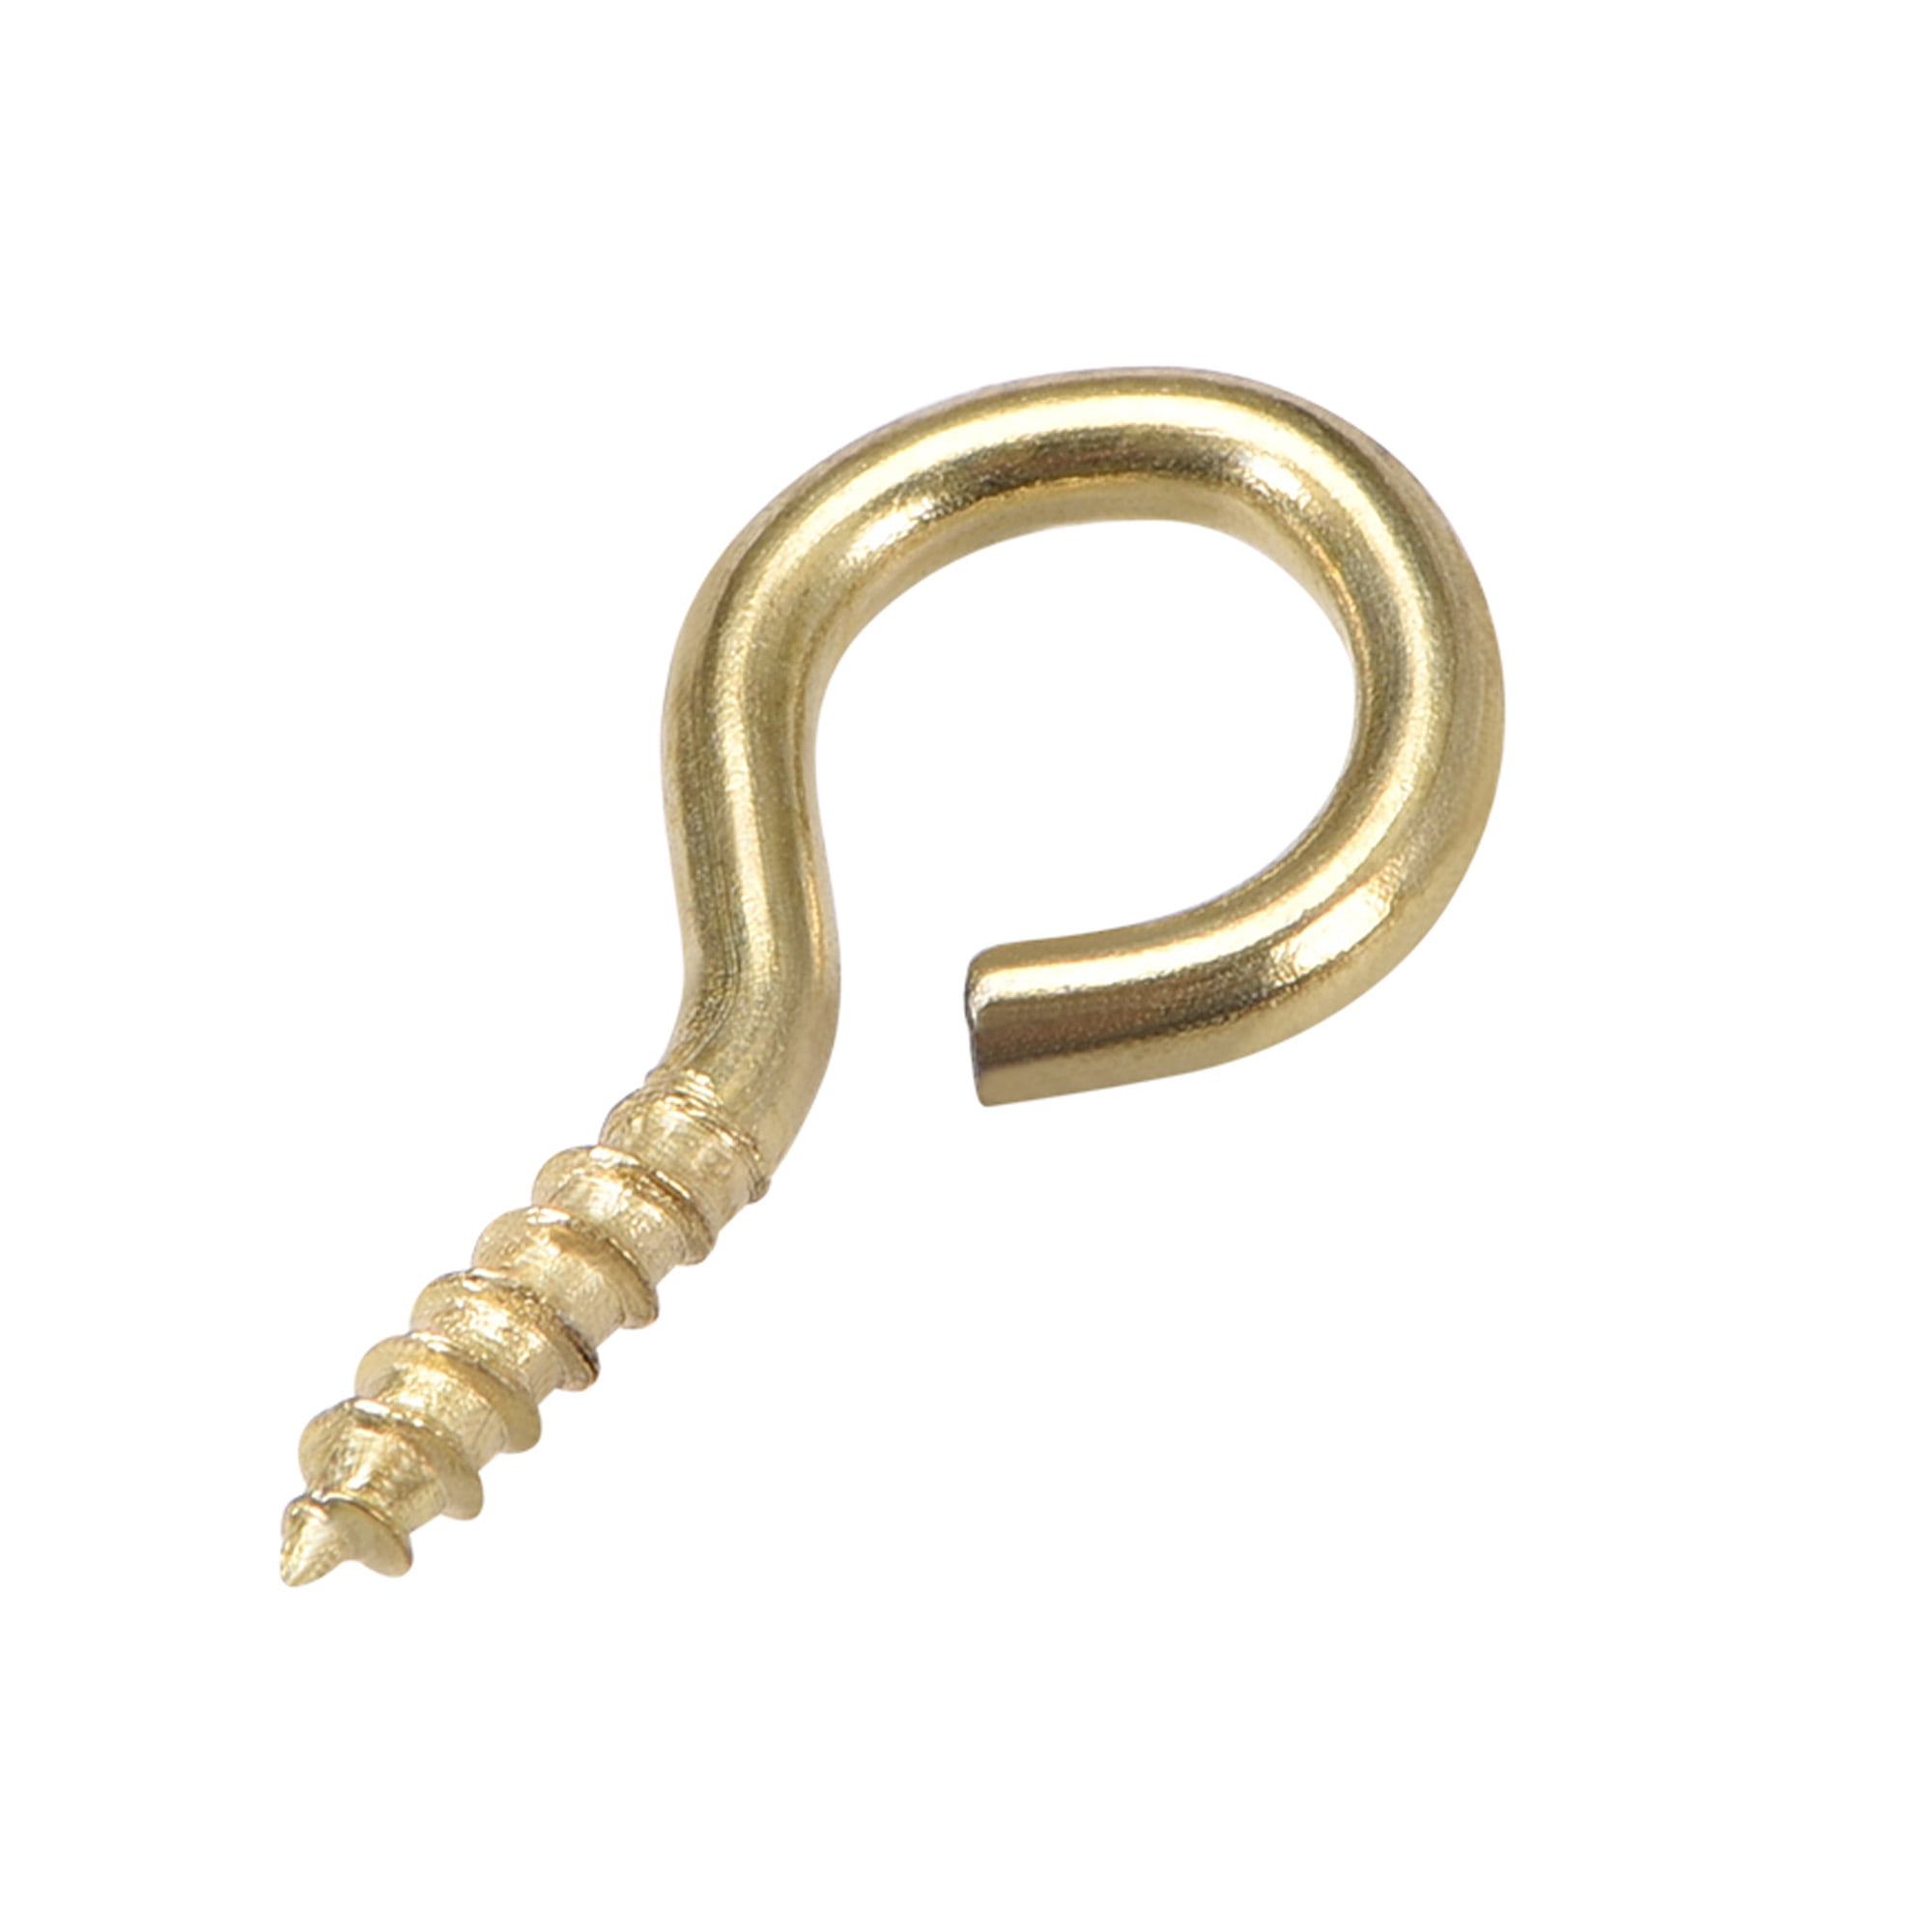 0.8 Screw Eye Hooks Self Tapping Screw-in Hanger with Plate Golden 100 pcs